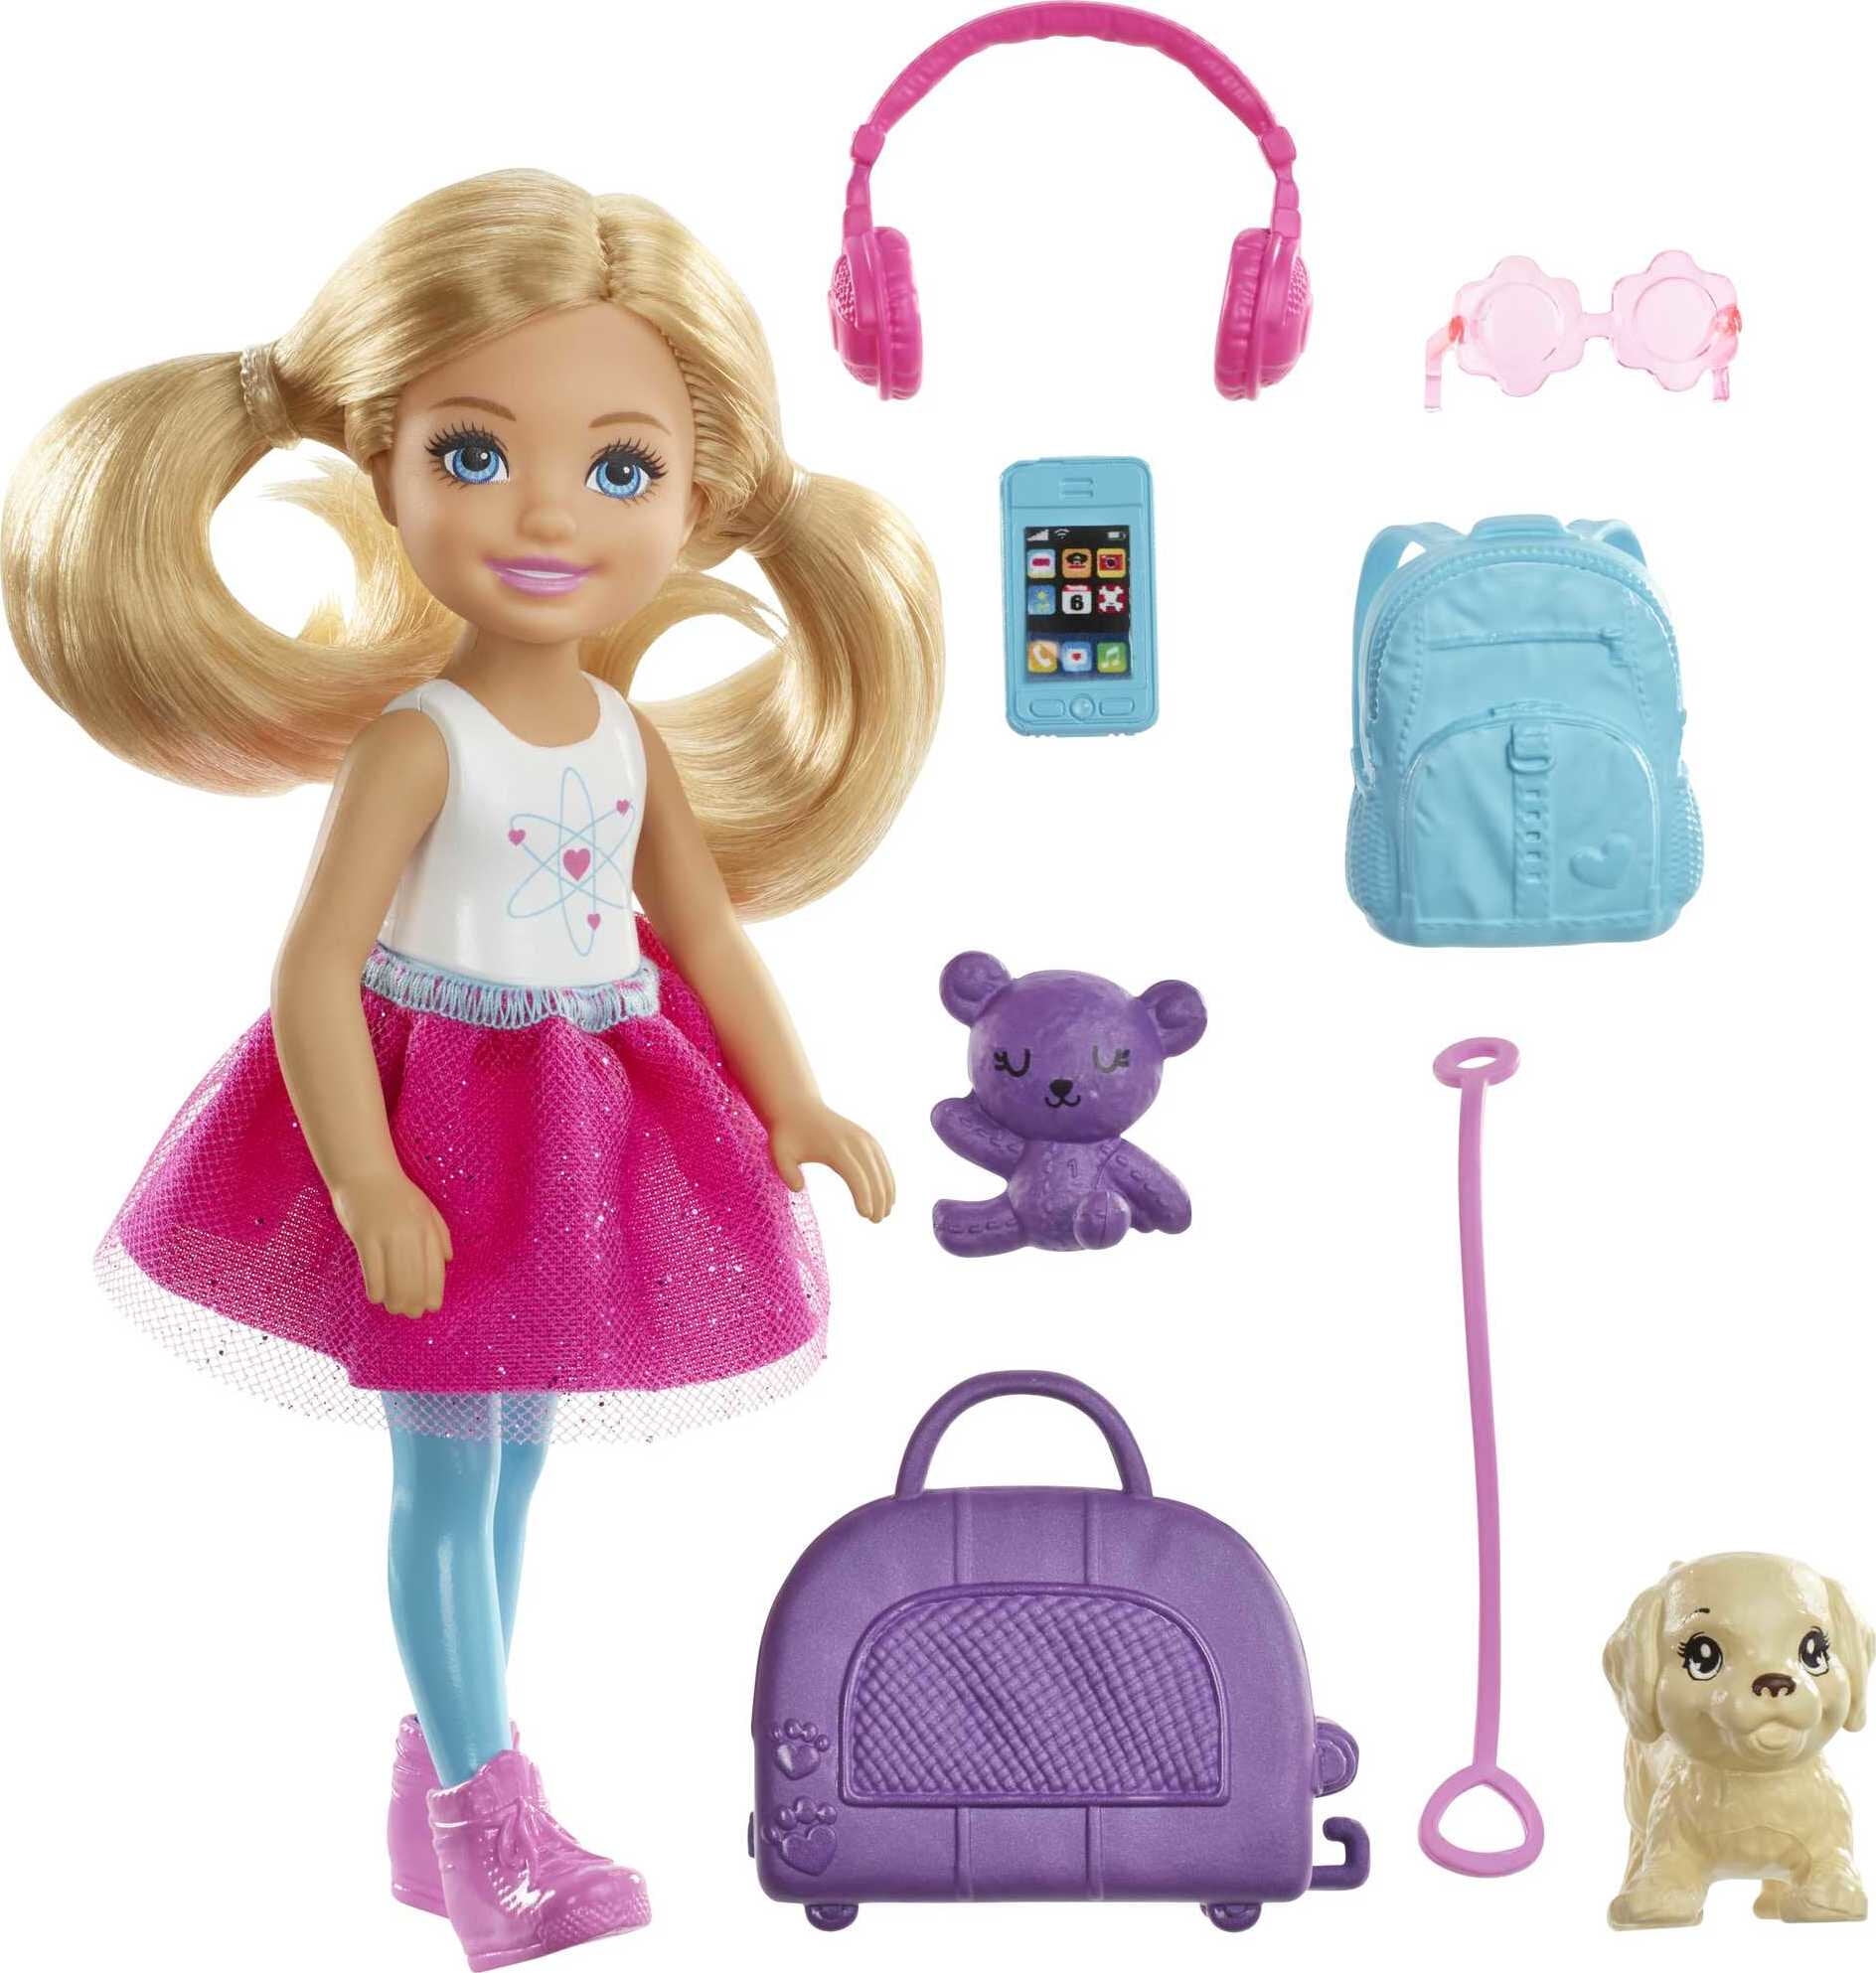 Barbie Dreamhouse Adventures Chelsea & Accessories, Travel Set with Blonde Small Doll Walmart.com